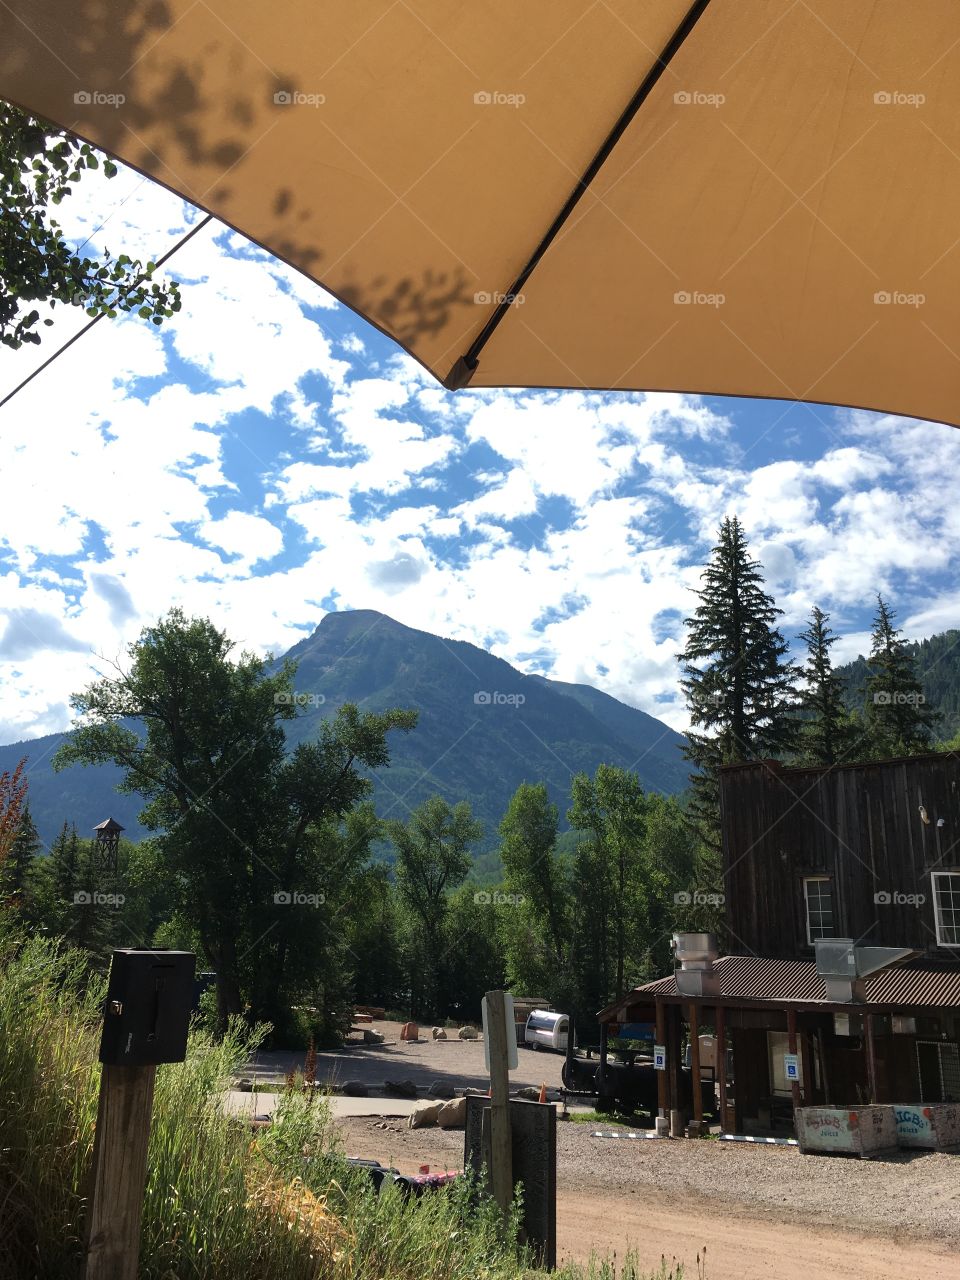 Viewing a beautiful mountain, blue sky’s & puffy white clouds while sitting under a cafe umbrella outside a small mountain town coffee shop. 